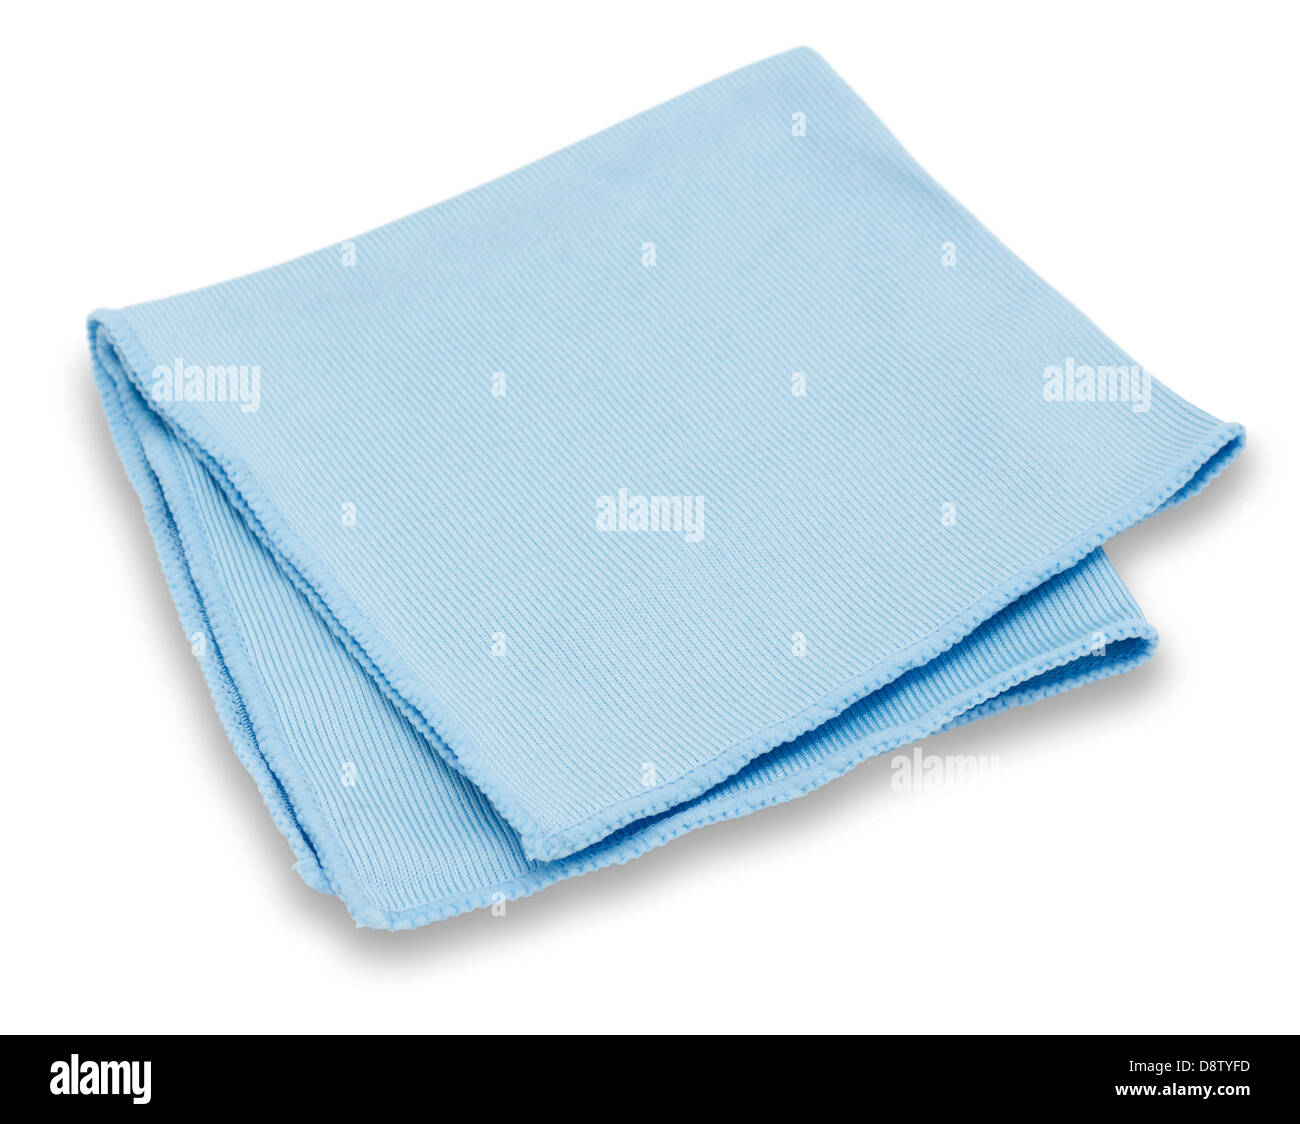 cleaning towel Stock Photo